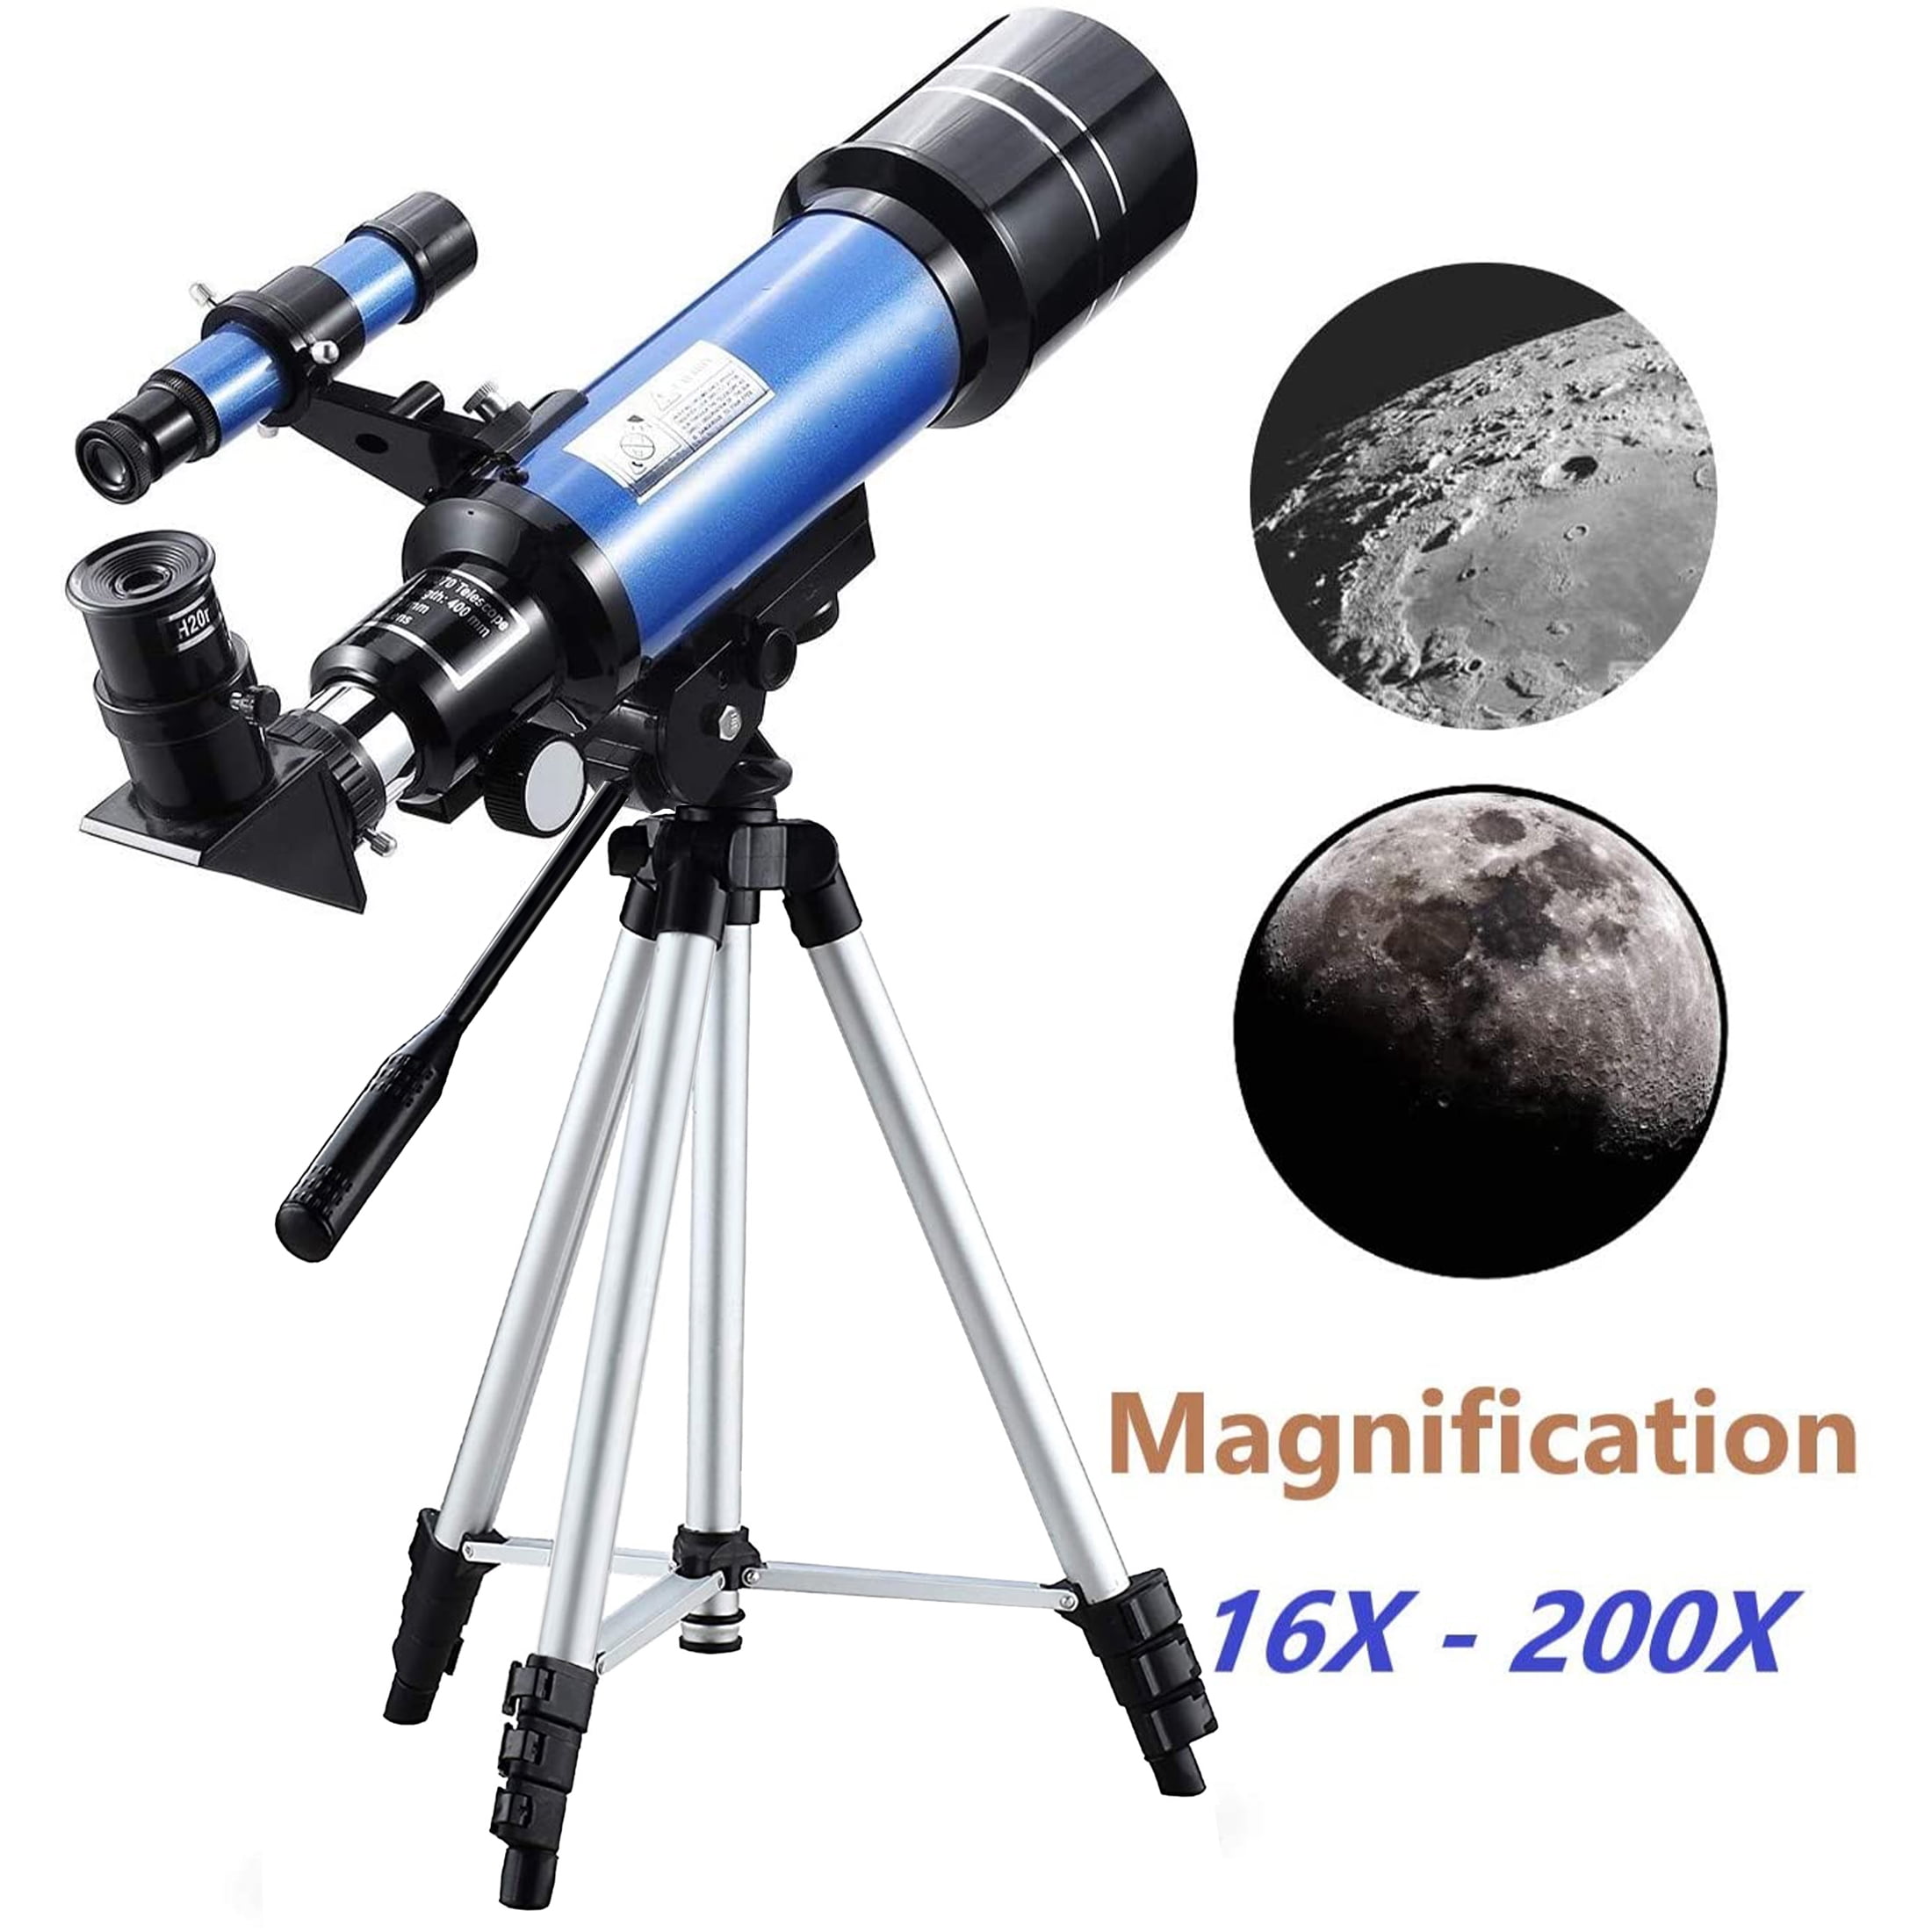 Astronomy 400mm f/5.7 CreazyDog Telescope for Kids & Adults 70mm Refractor with Finder Scope & Tripod to Observe Moon and Planet 